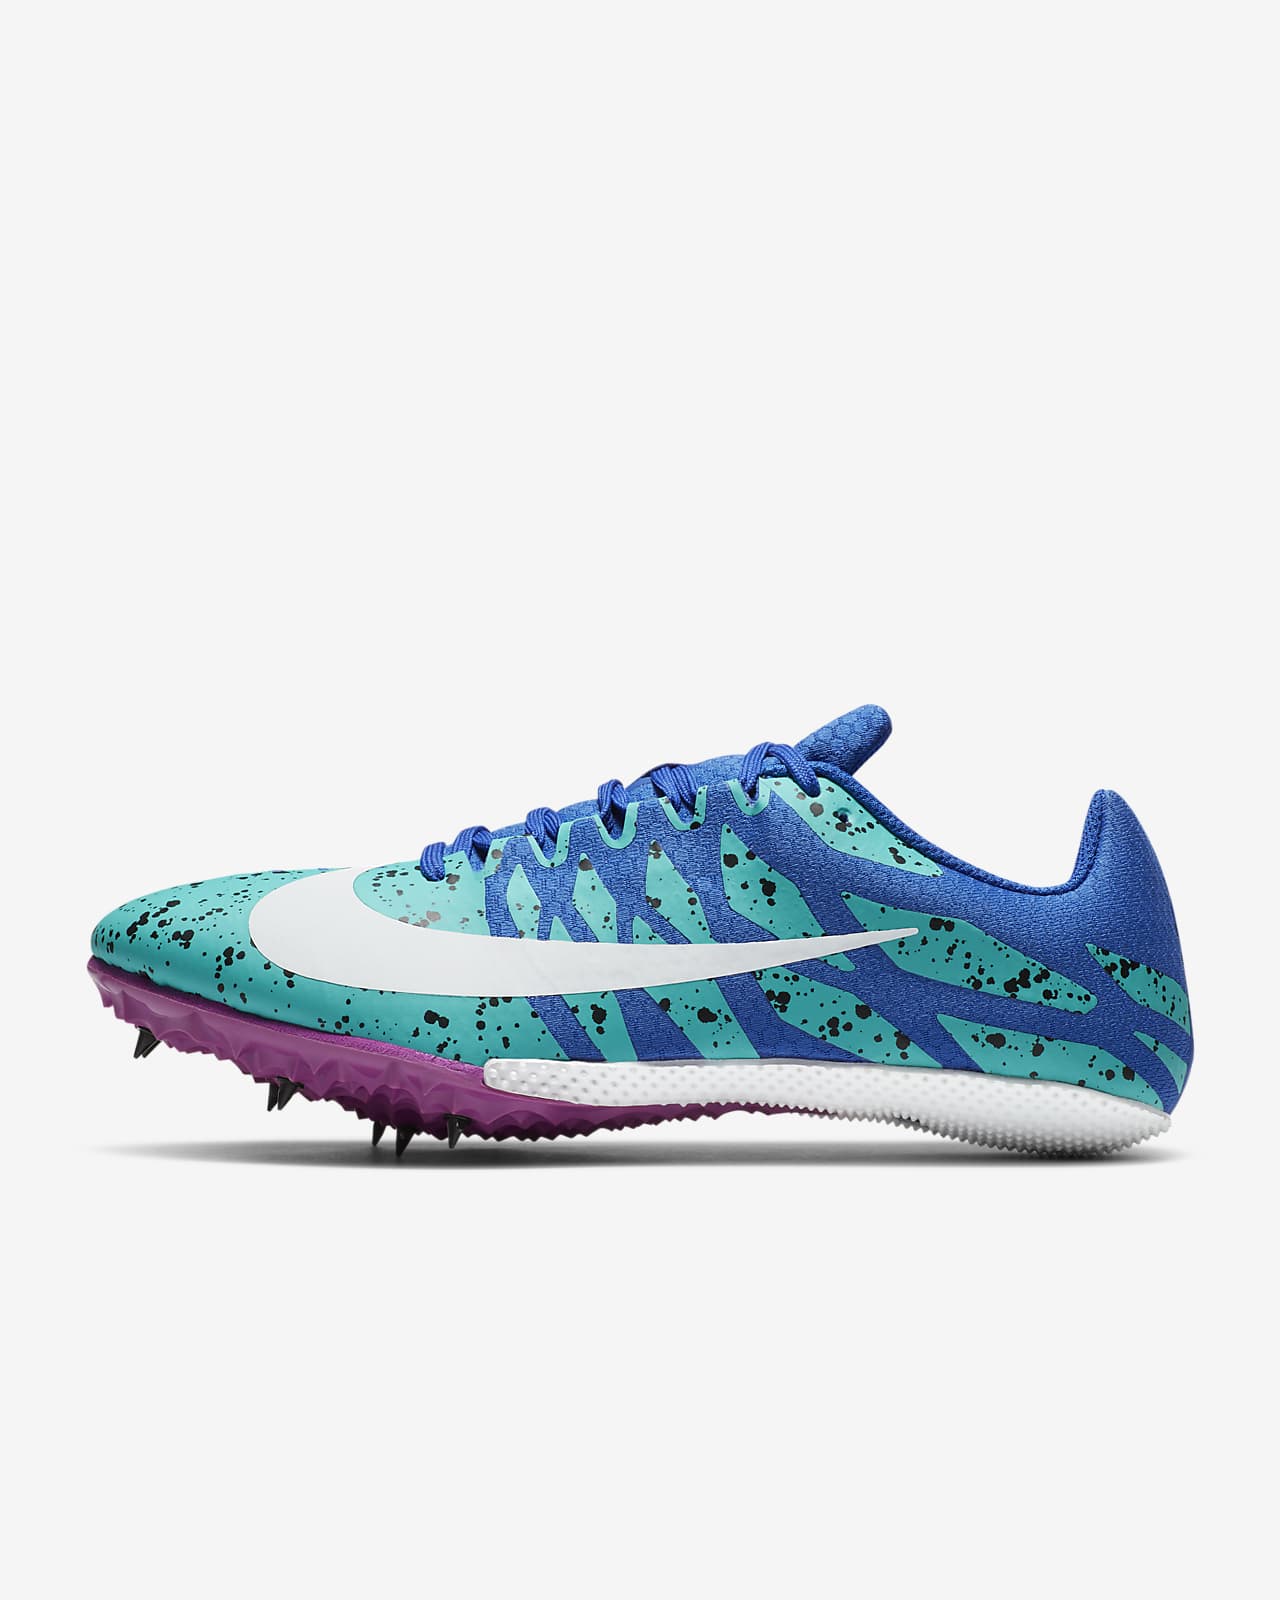 nike track shoes spikes